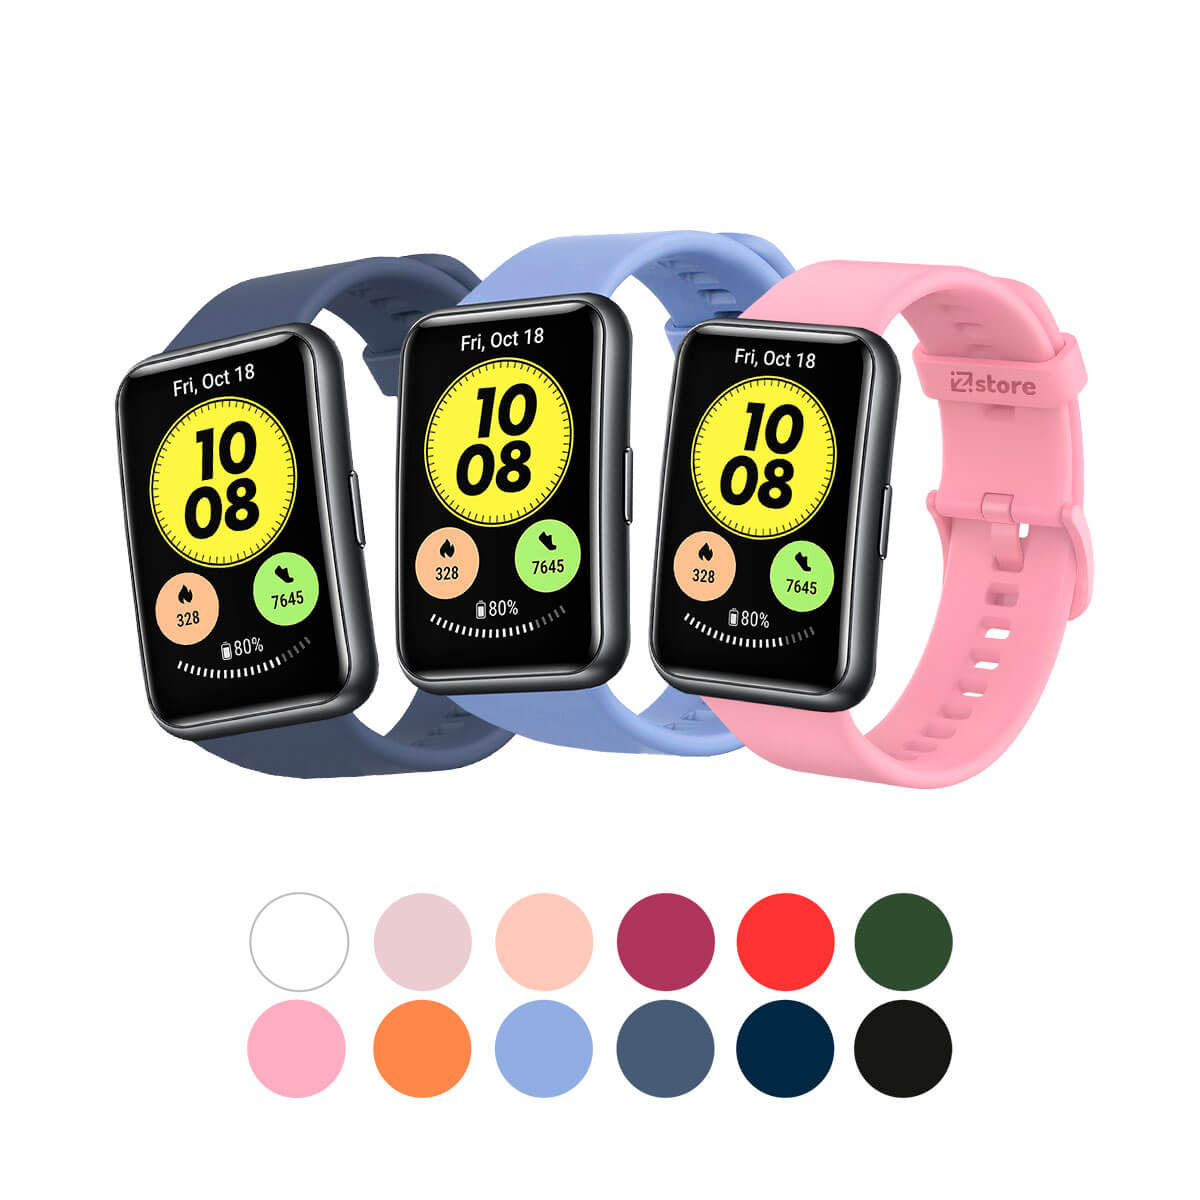 https://www.izistoreperu.com/wp-content/uploads/2021/08/correa-silicona-huawei-watch-fit-colores.jpg